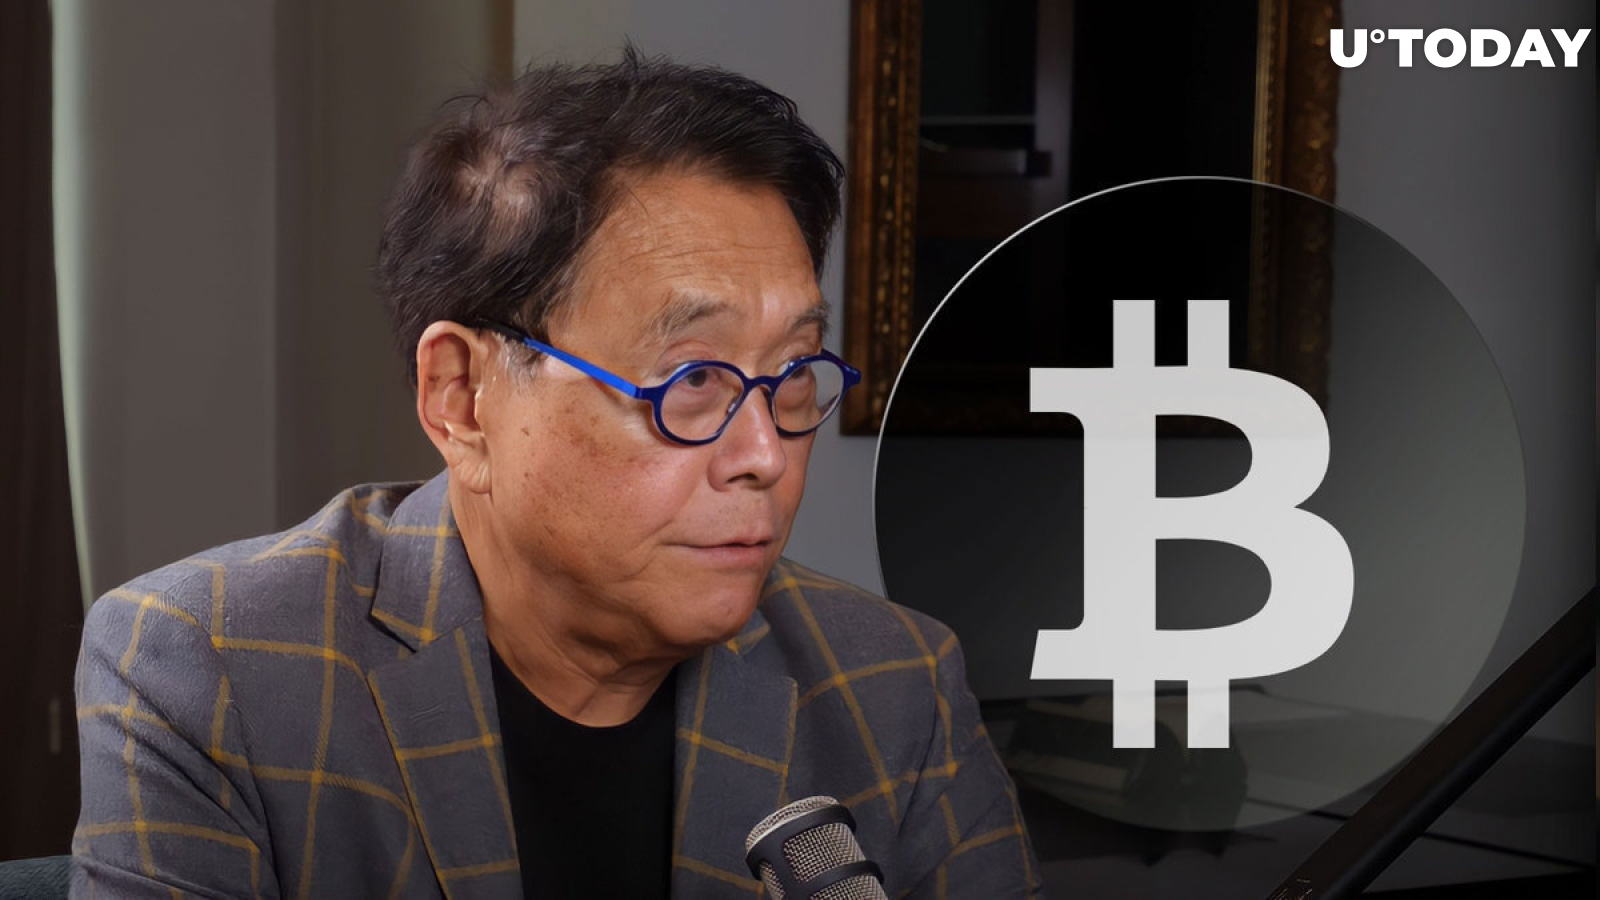 'Rich Dad Poor Dad' Author Says 'Giant Crash' Coming, 'Get into Bitcoin ASAP'